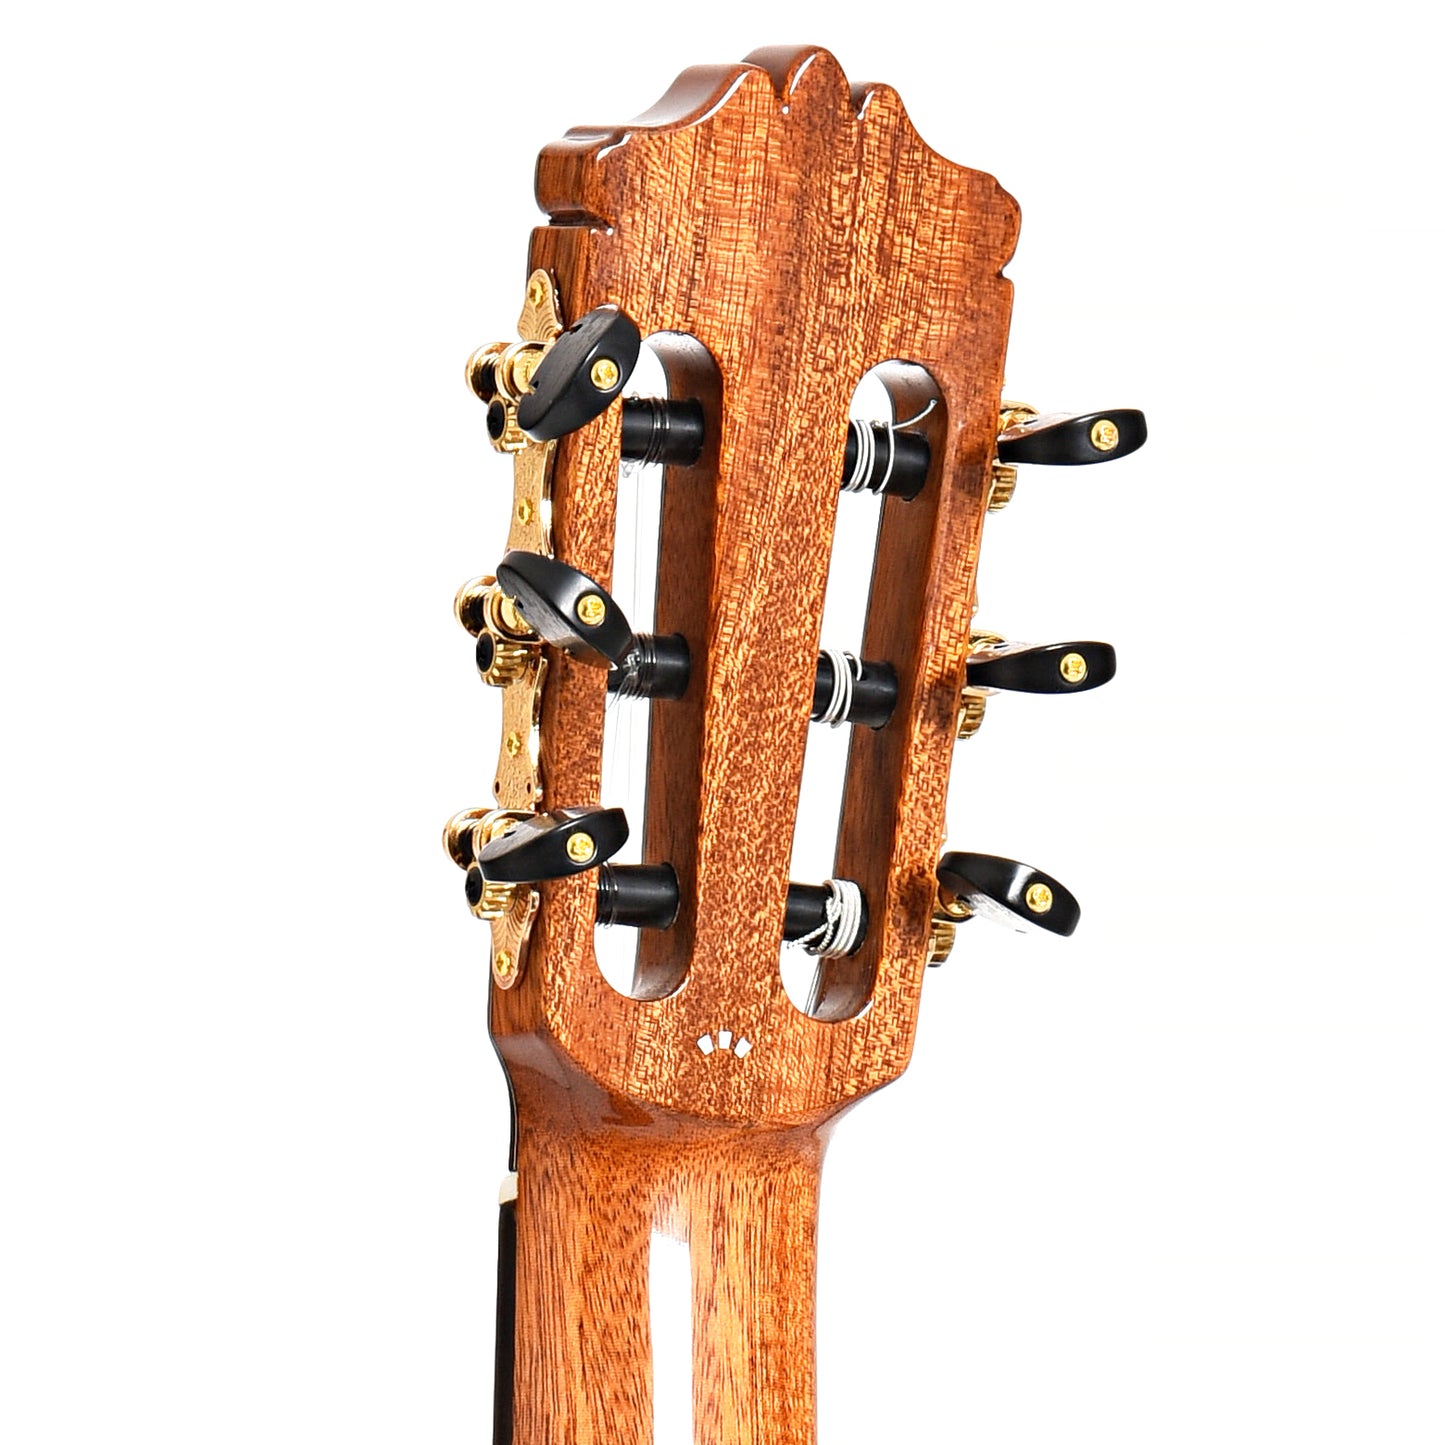 Image 8 of Cordoba C9 Classical Guitar and Case - SKU# CORC9C : Product Type Classical & Flamenco Guitars : Elderly Instruments